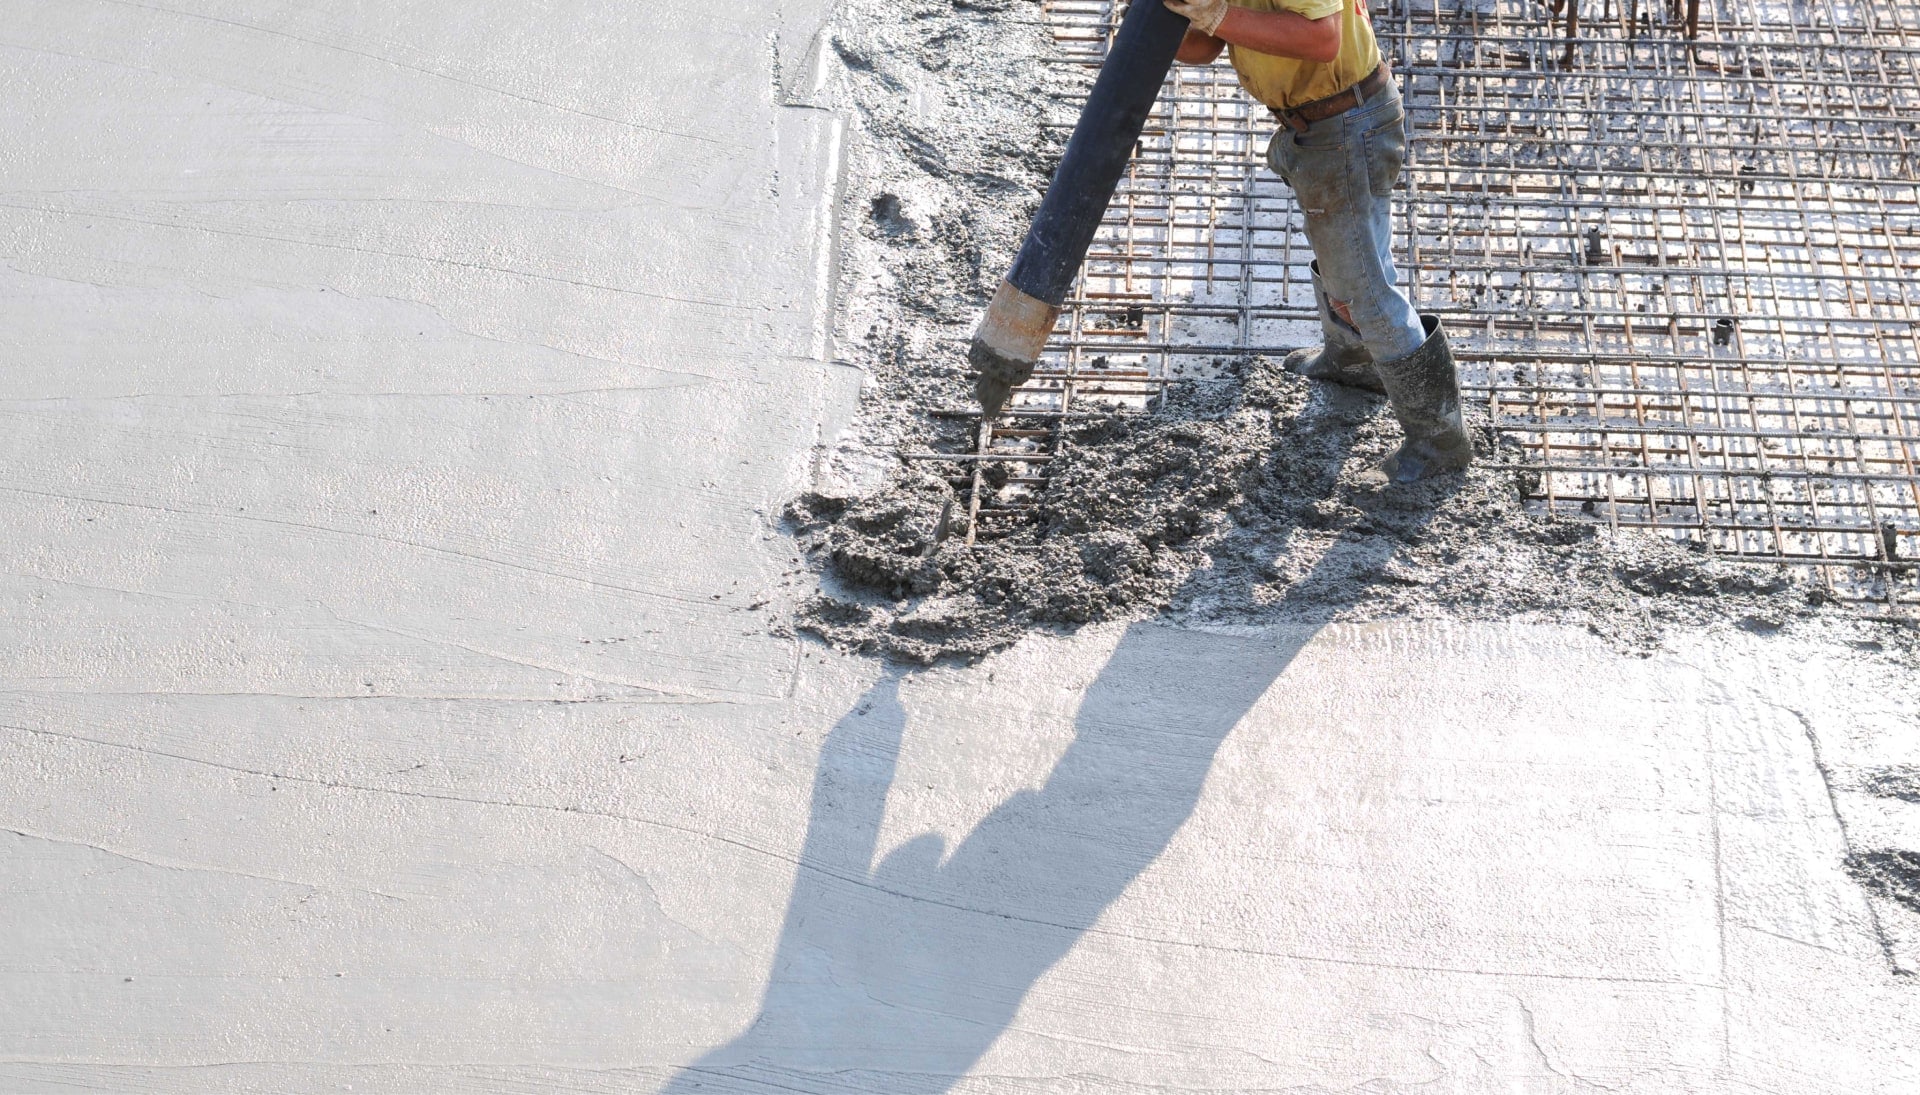 High-Quality Concrete Foundation Services in Lehigh Valley, Pennsylvania area for Residential or Commercial Projects